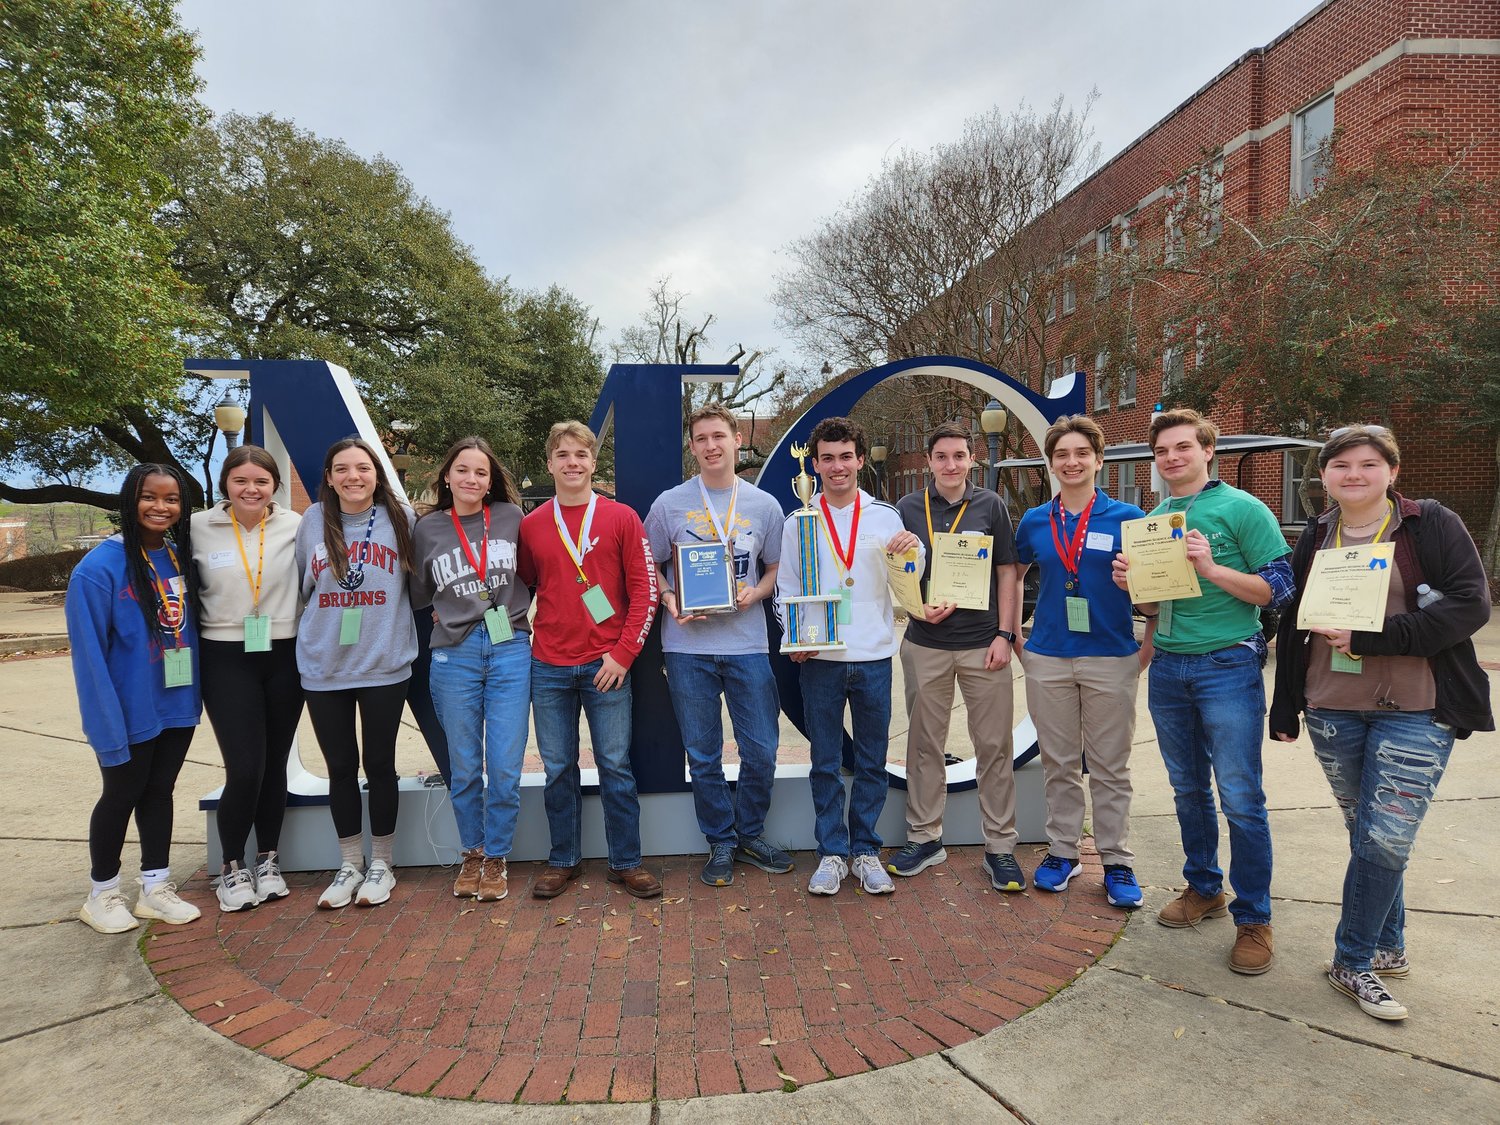 St. Joseph Catholic School took home the overall first-place trophy from this year’s Mississippi Science and Mathematics Tournament. Pictured from left: Alexia Brown; Rachel Donaldson; Lauren Abadie, Leah Munoz, Daniel Dear, Lockard Williams, Andrew Doherty, J.J. Tice, Teddy Klopman, Thomas Klopman, and Mary Topik, who scored in the top 10 percent in chemistry and was on the quiz bowl team.